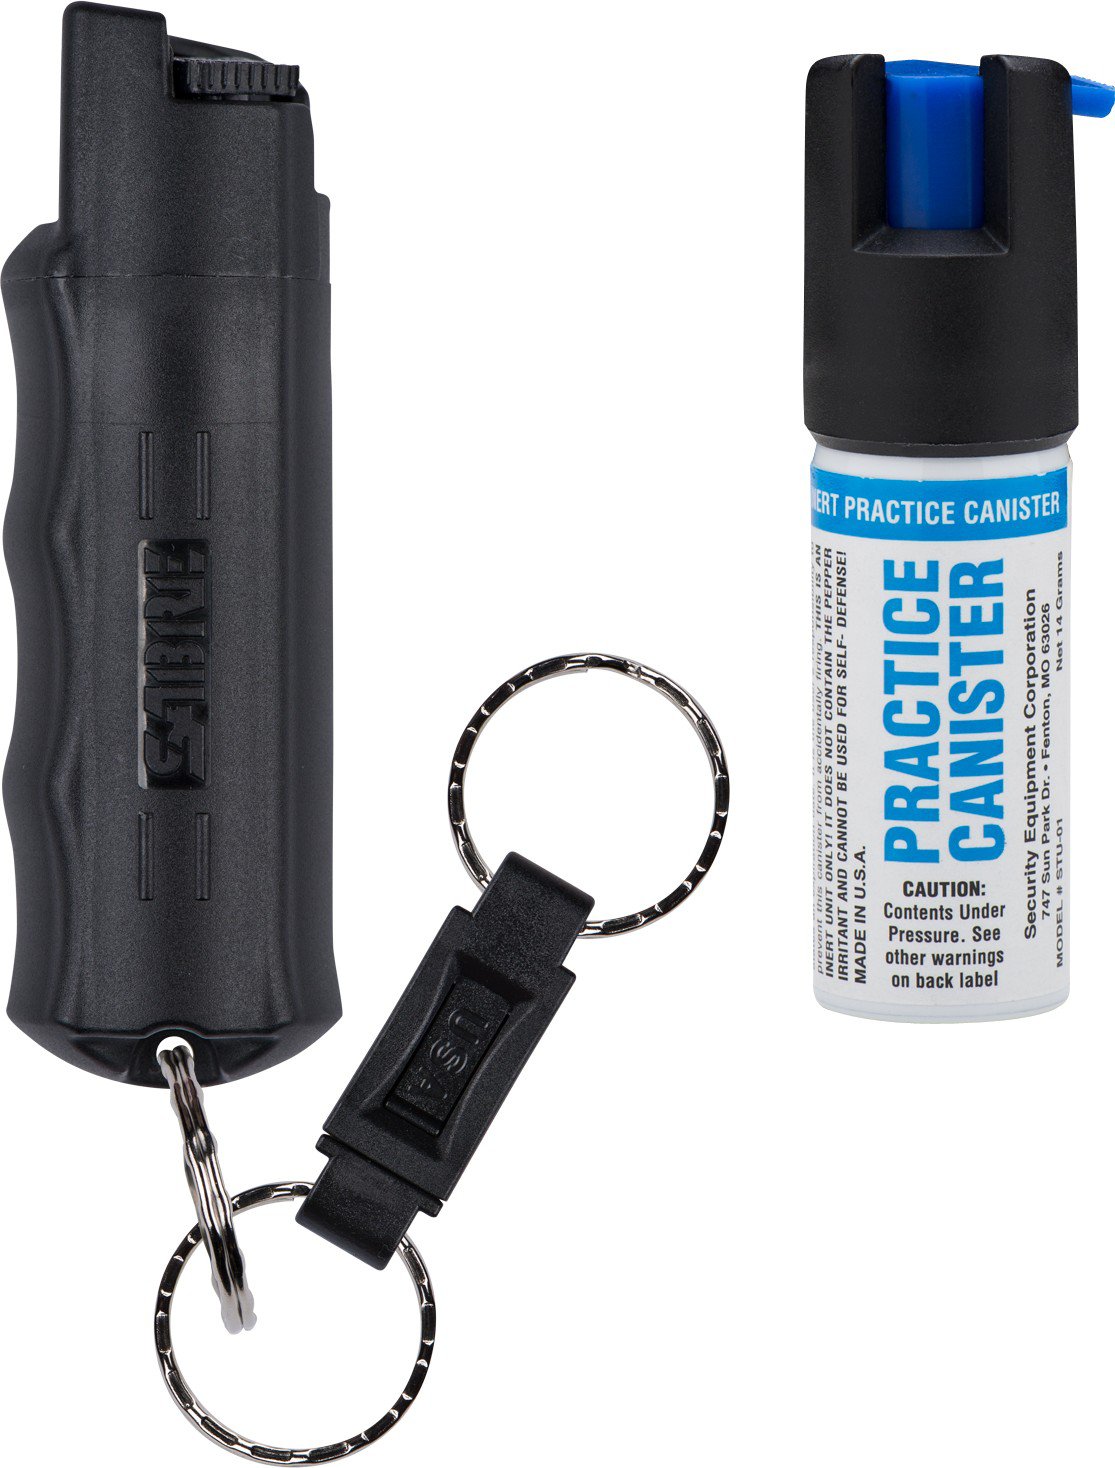 super-cute pepper spray keychain for self defense rose gold - walmartcom on where to buy pepper spray in ny state